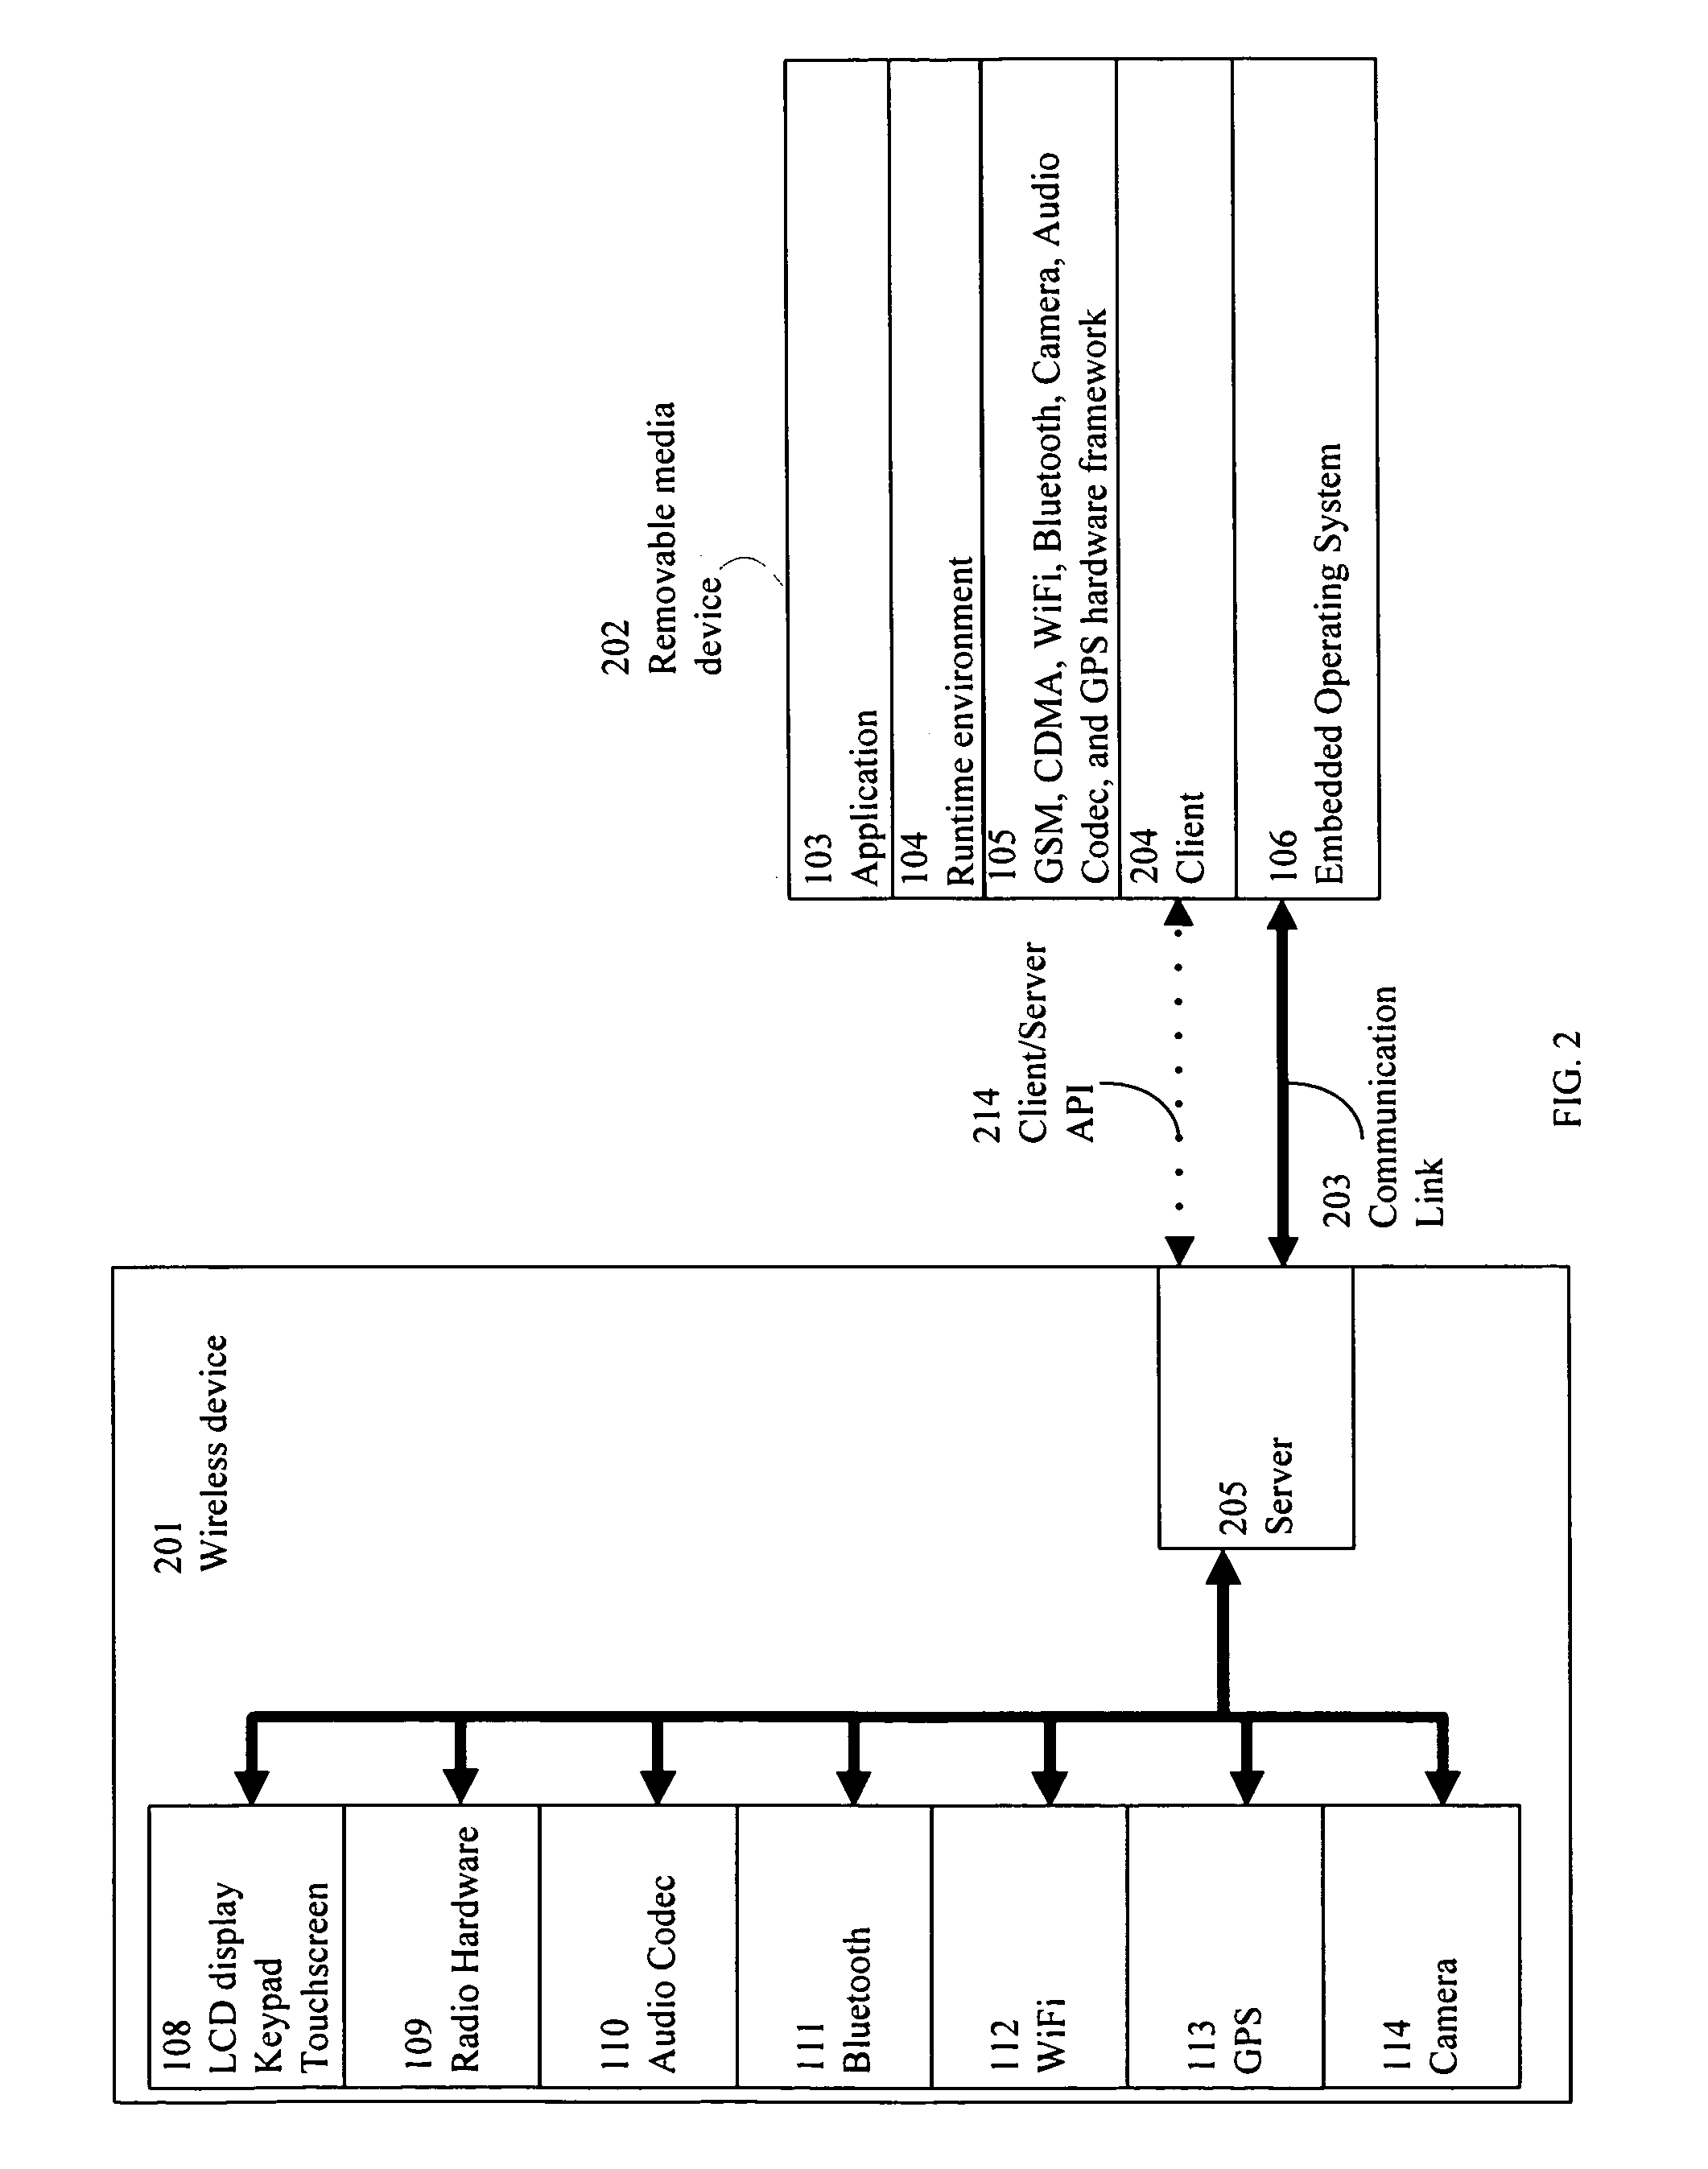 System and method for remotely operating a wireless device using a server and client architecture